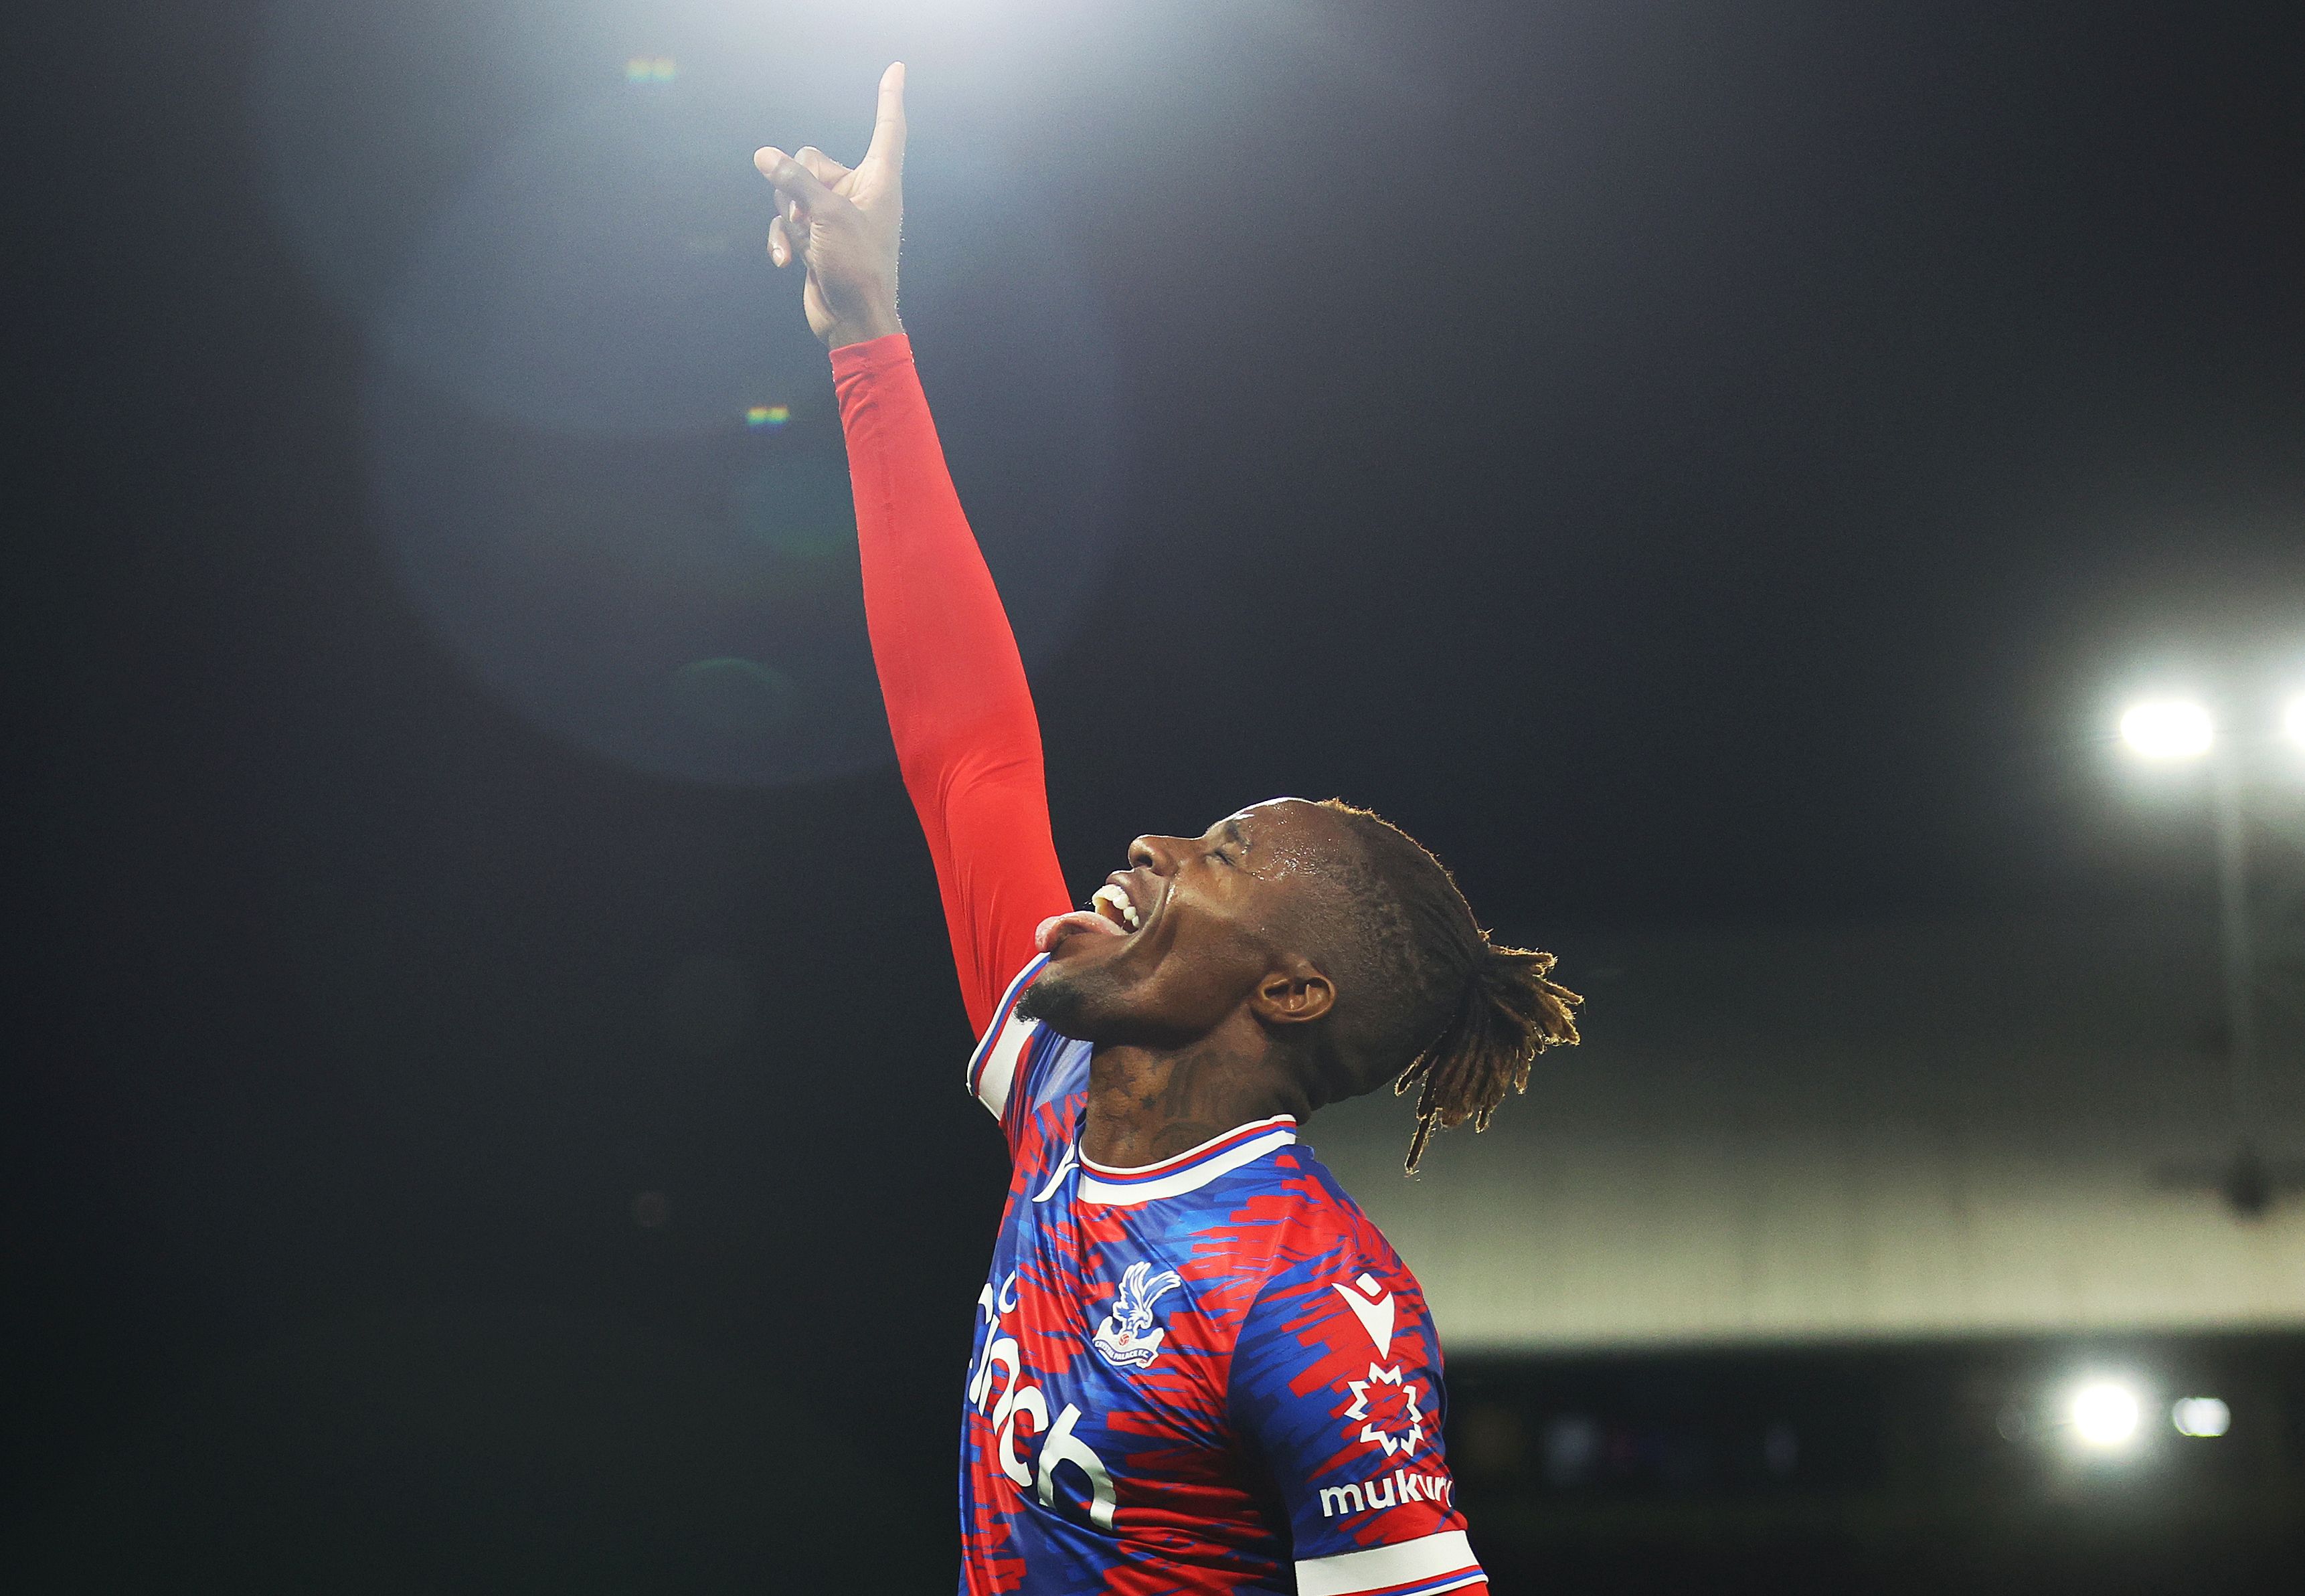 Wilfried Zaha of Crystal Palace celebrates after scoring their team's first goal during the Premier League match between Crystal Palace and Brentford FC at Selhurst Park on August 30, 2022 in London, England.